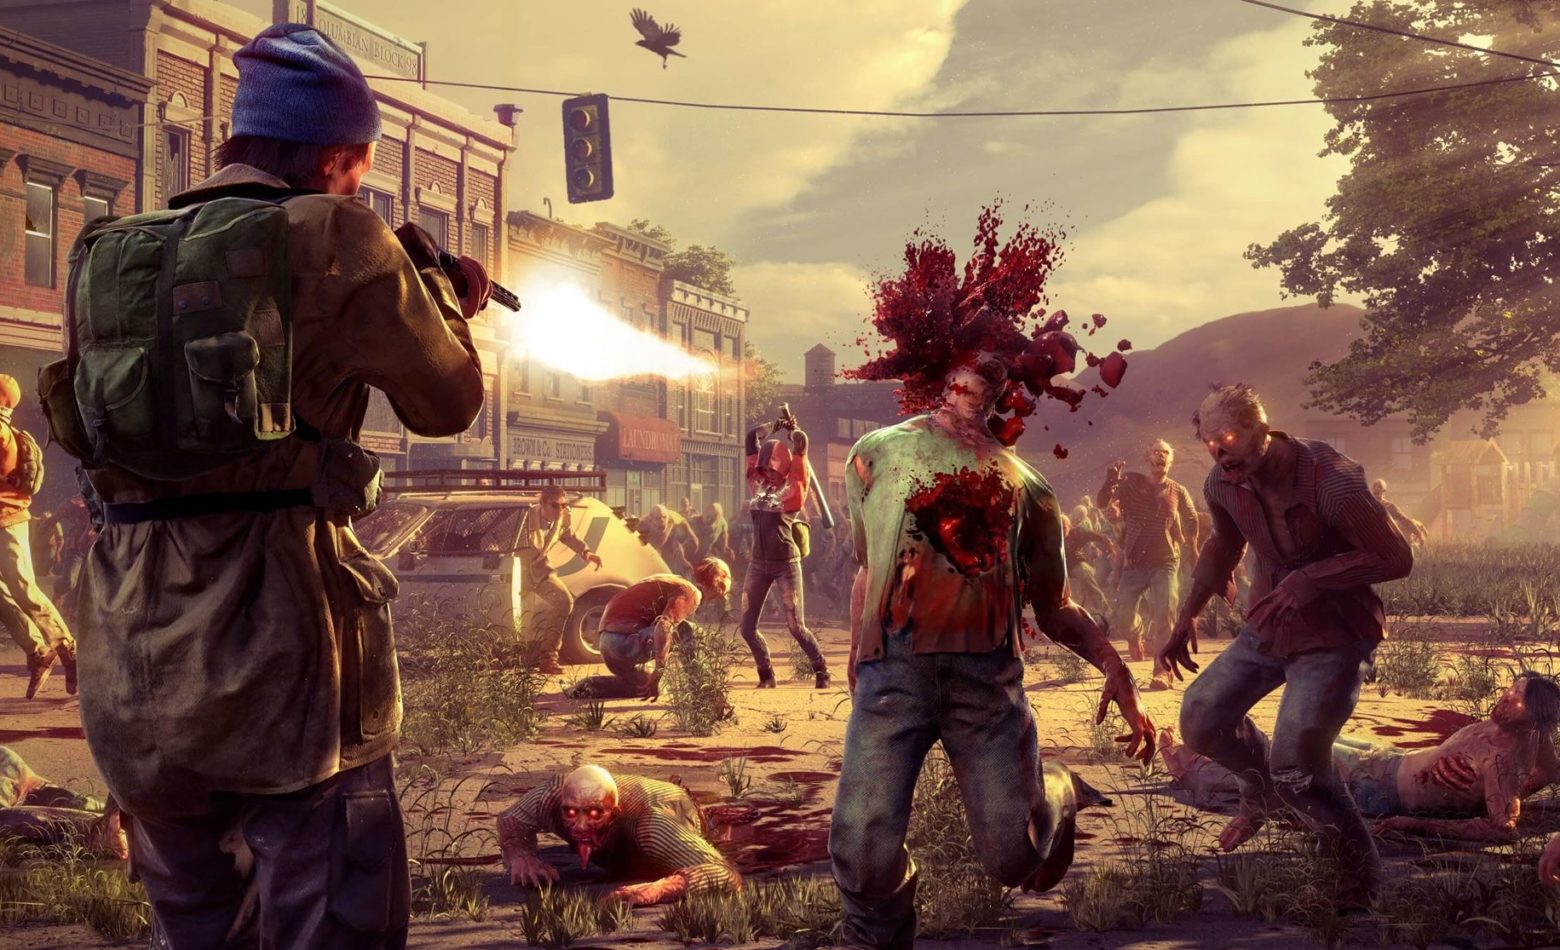 state of decay pc completo